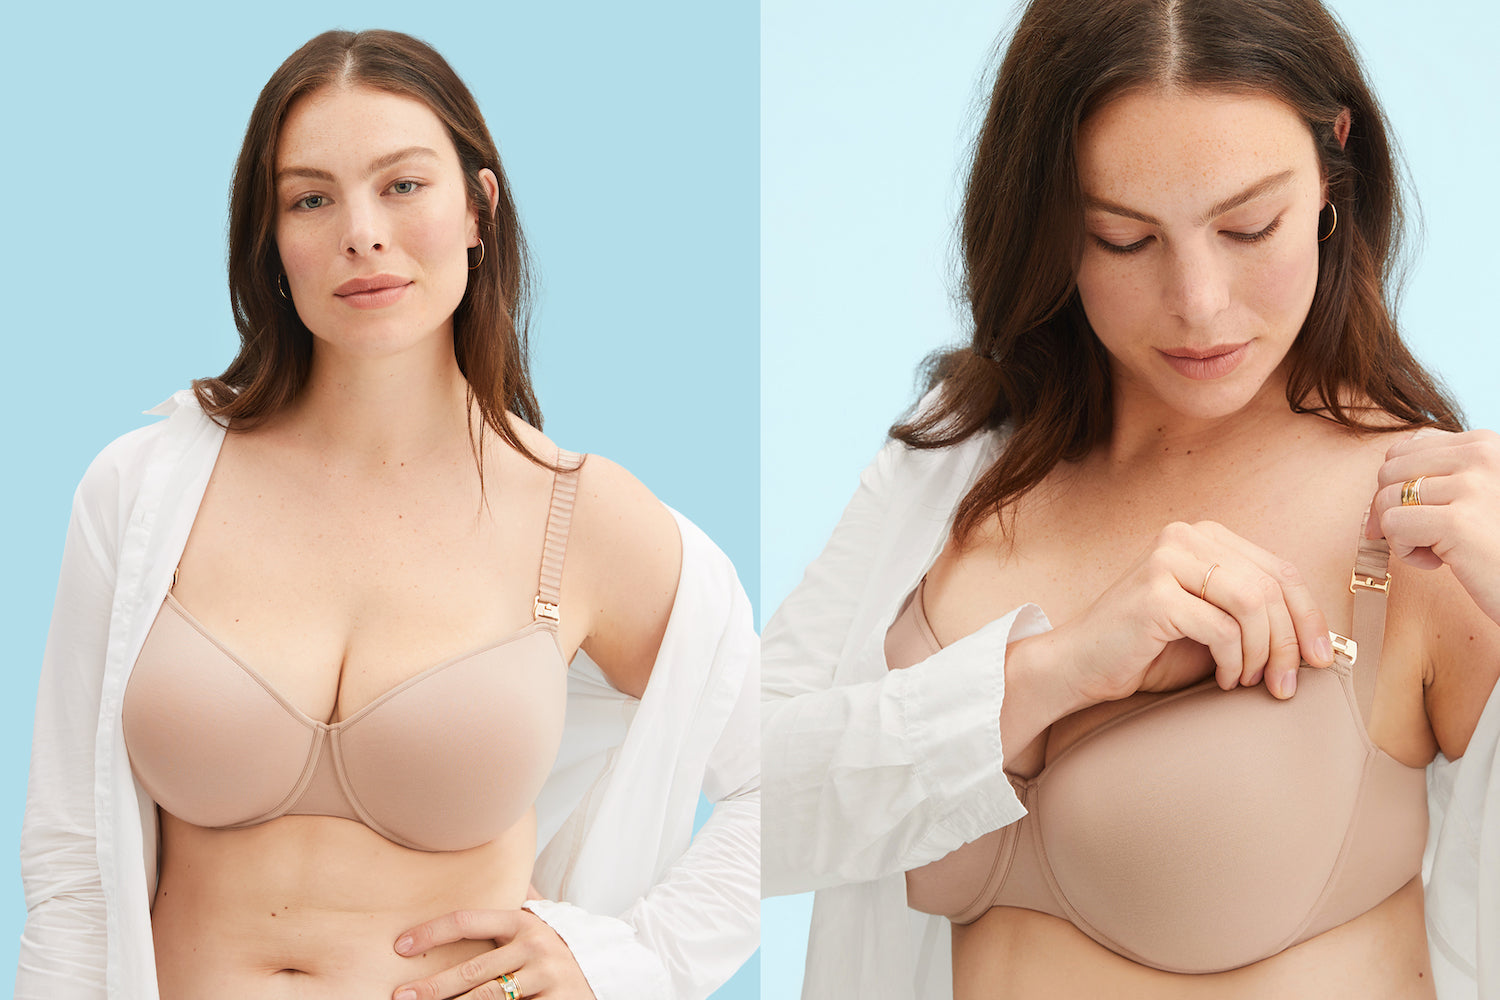 Top 4 Most Supportive Nursing Bras for Large Breasts - Best Maternity Bras  For Big Boobs